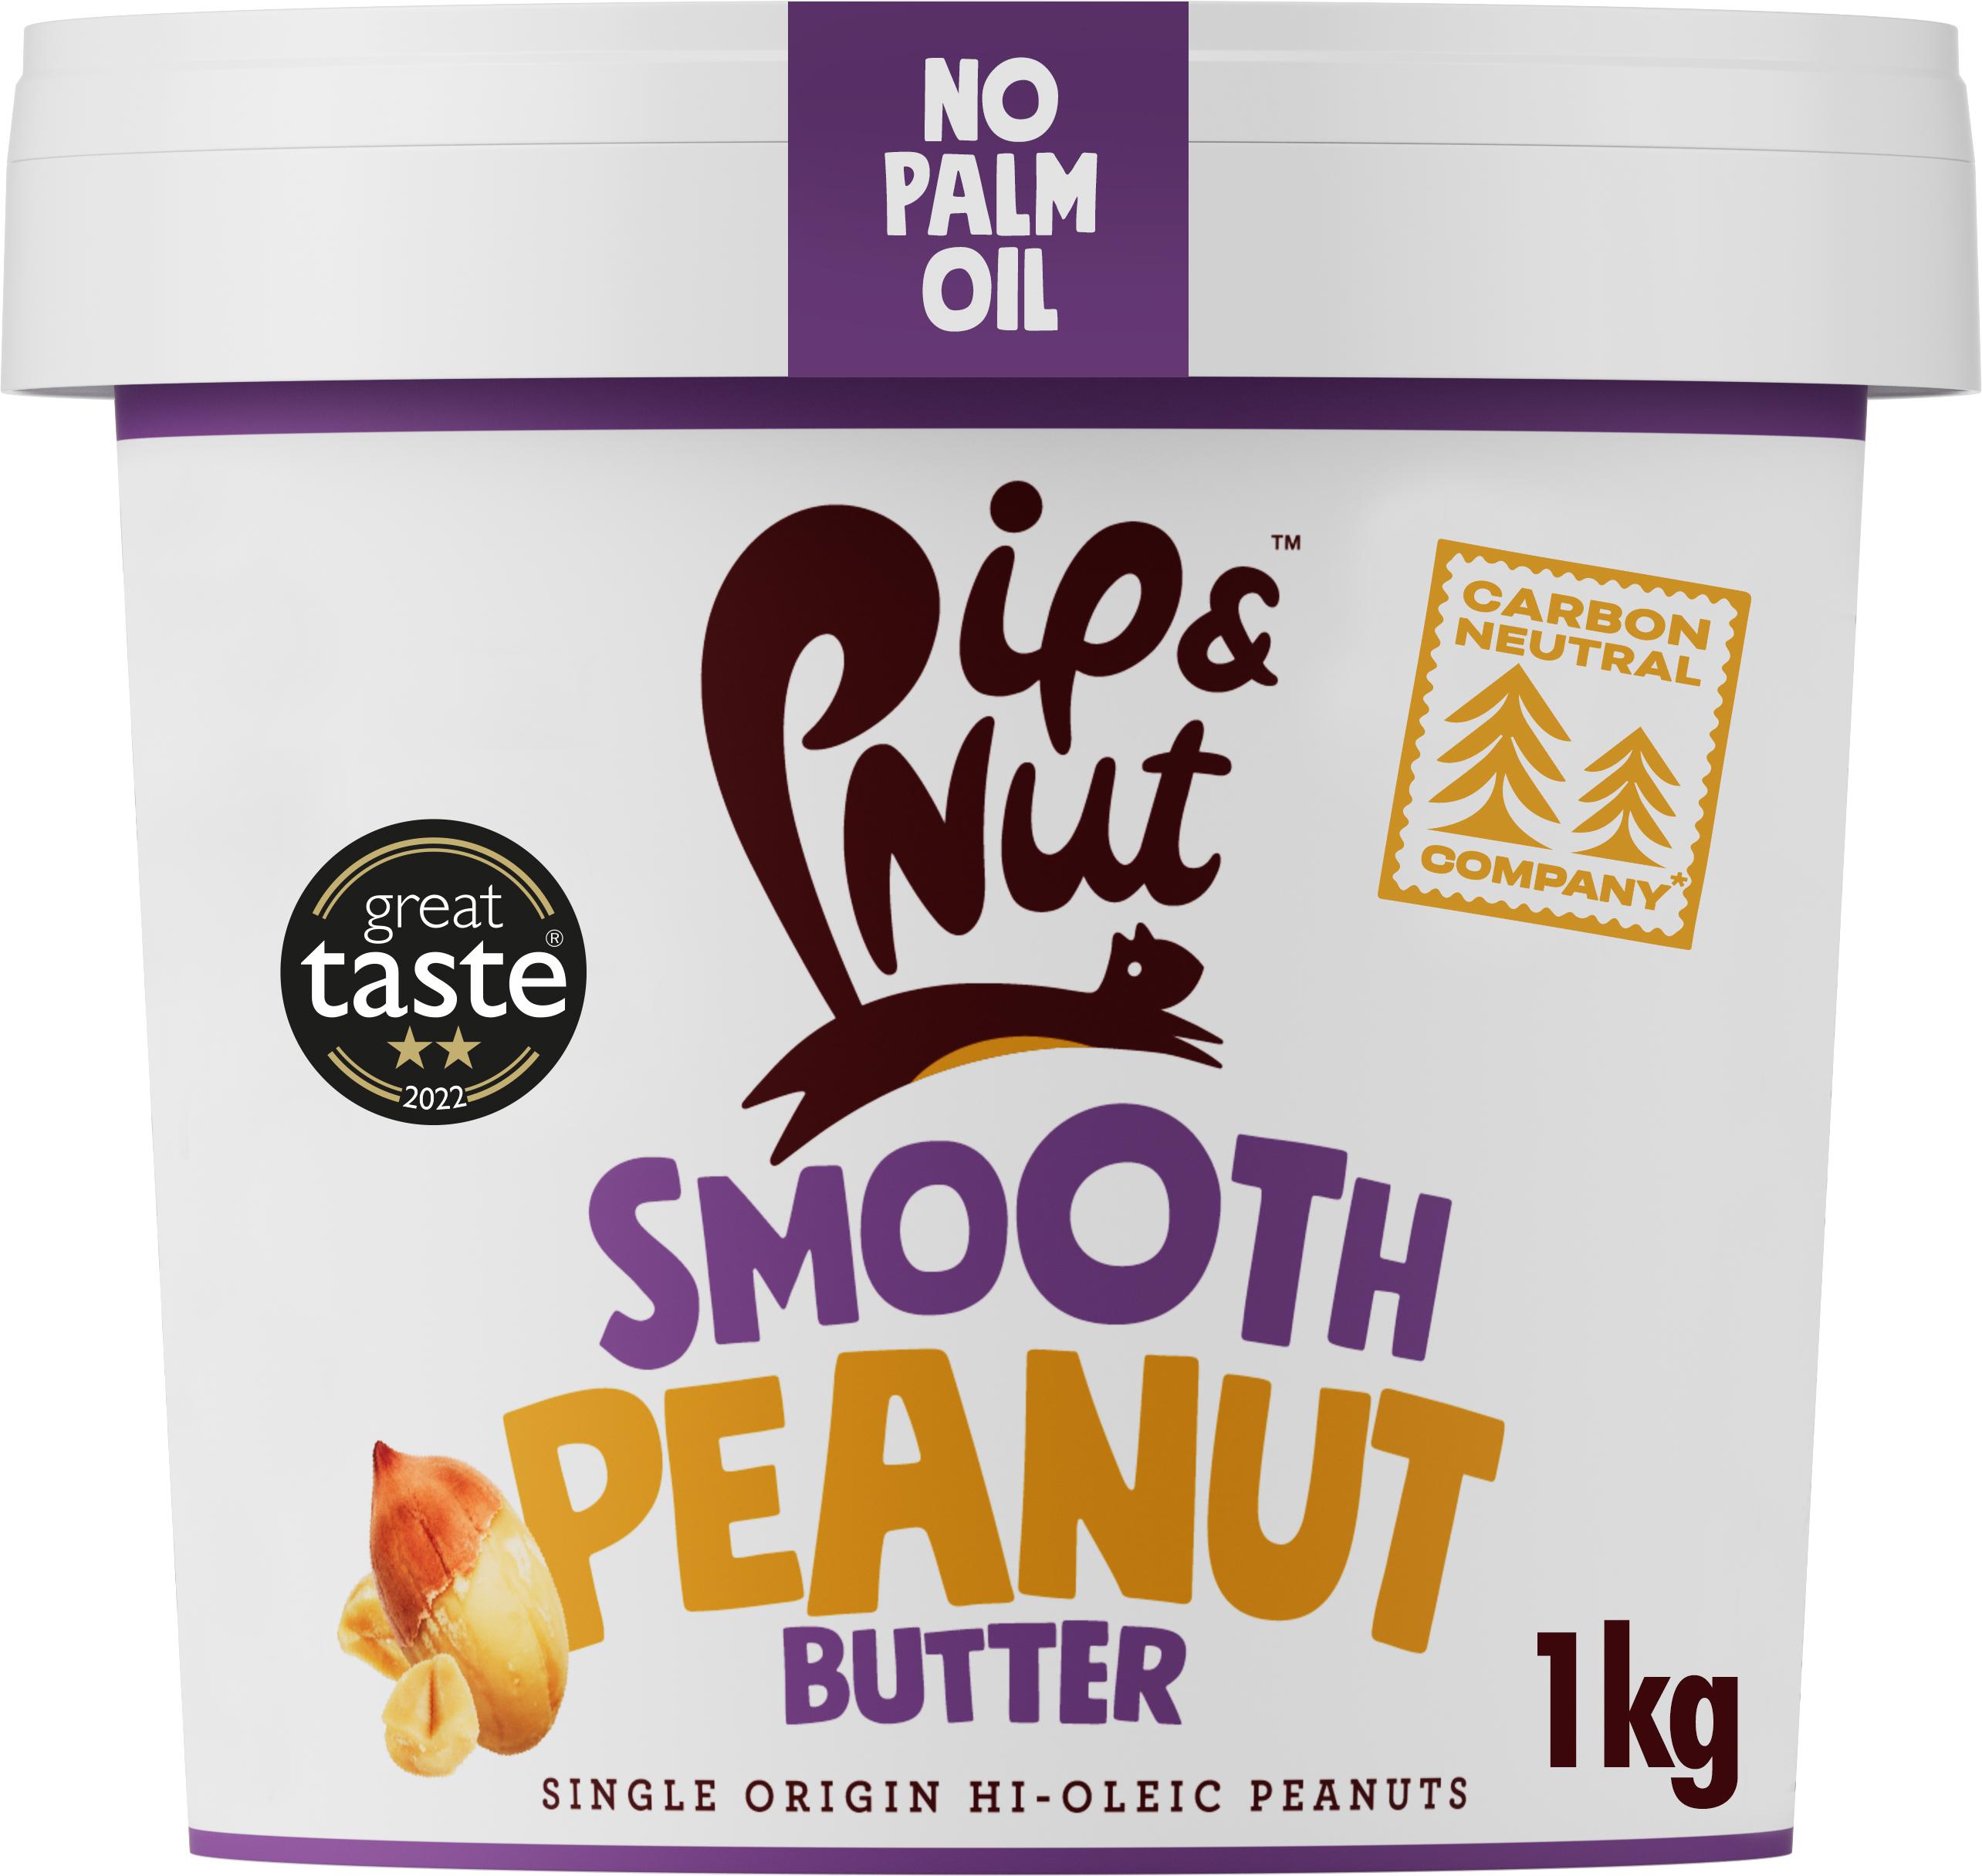 PipandNut Smooth Peanut Butter (1kg)